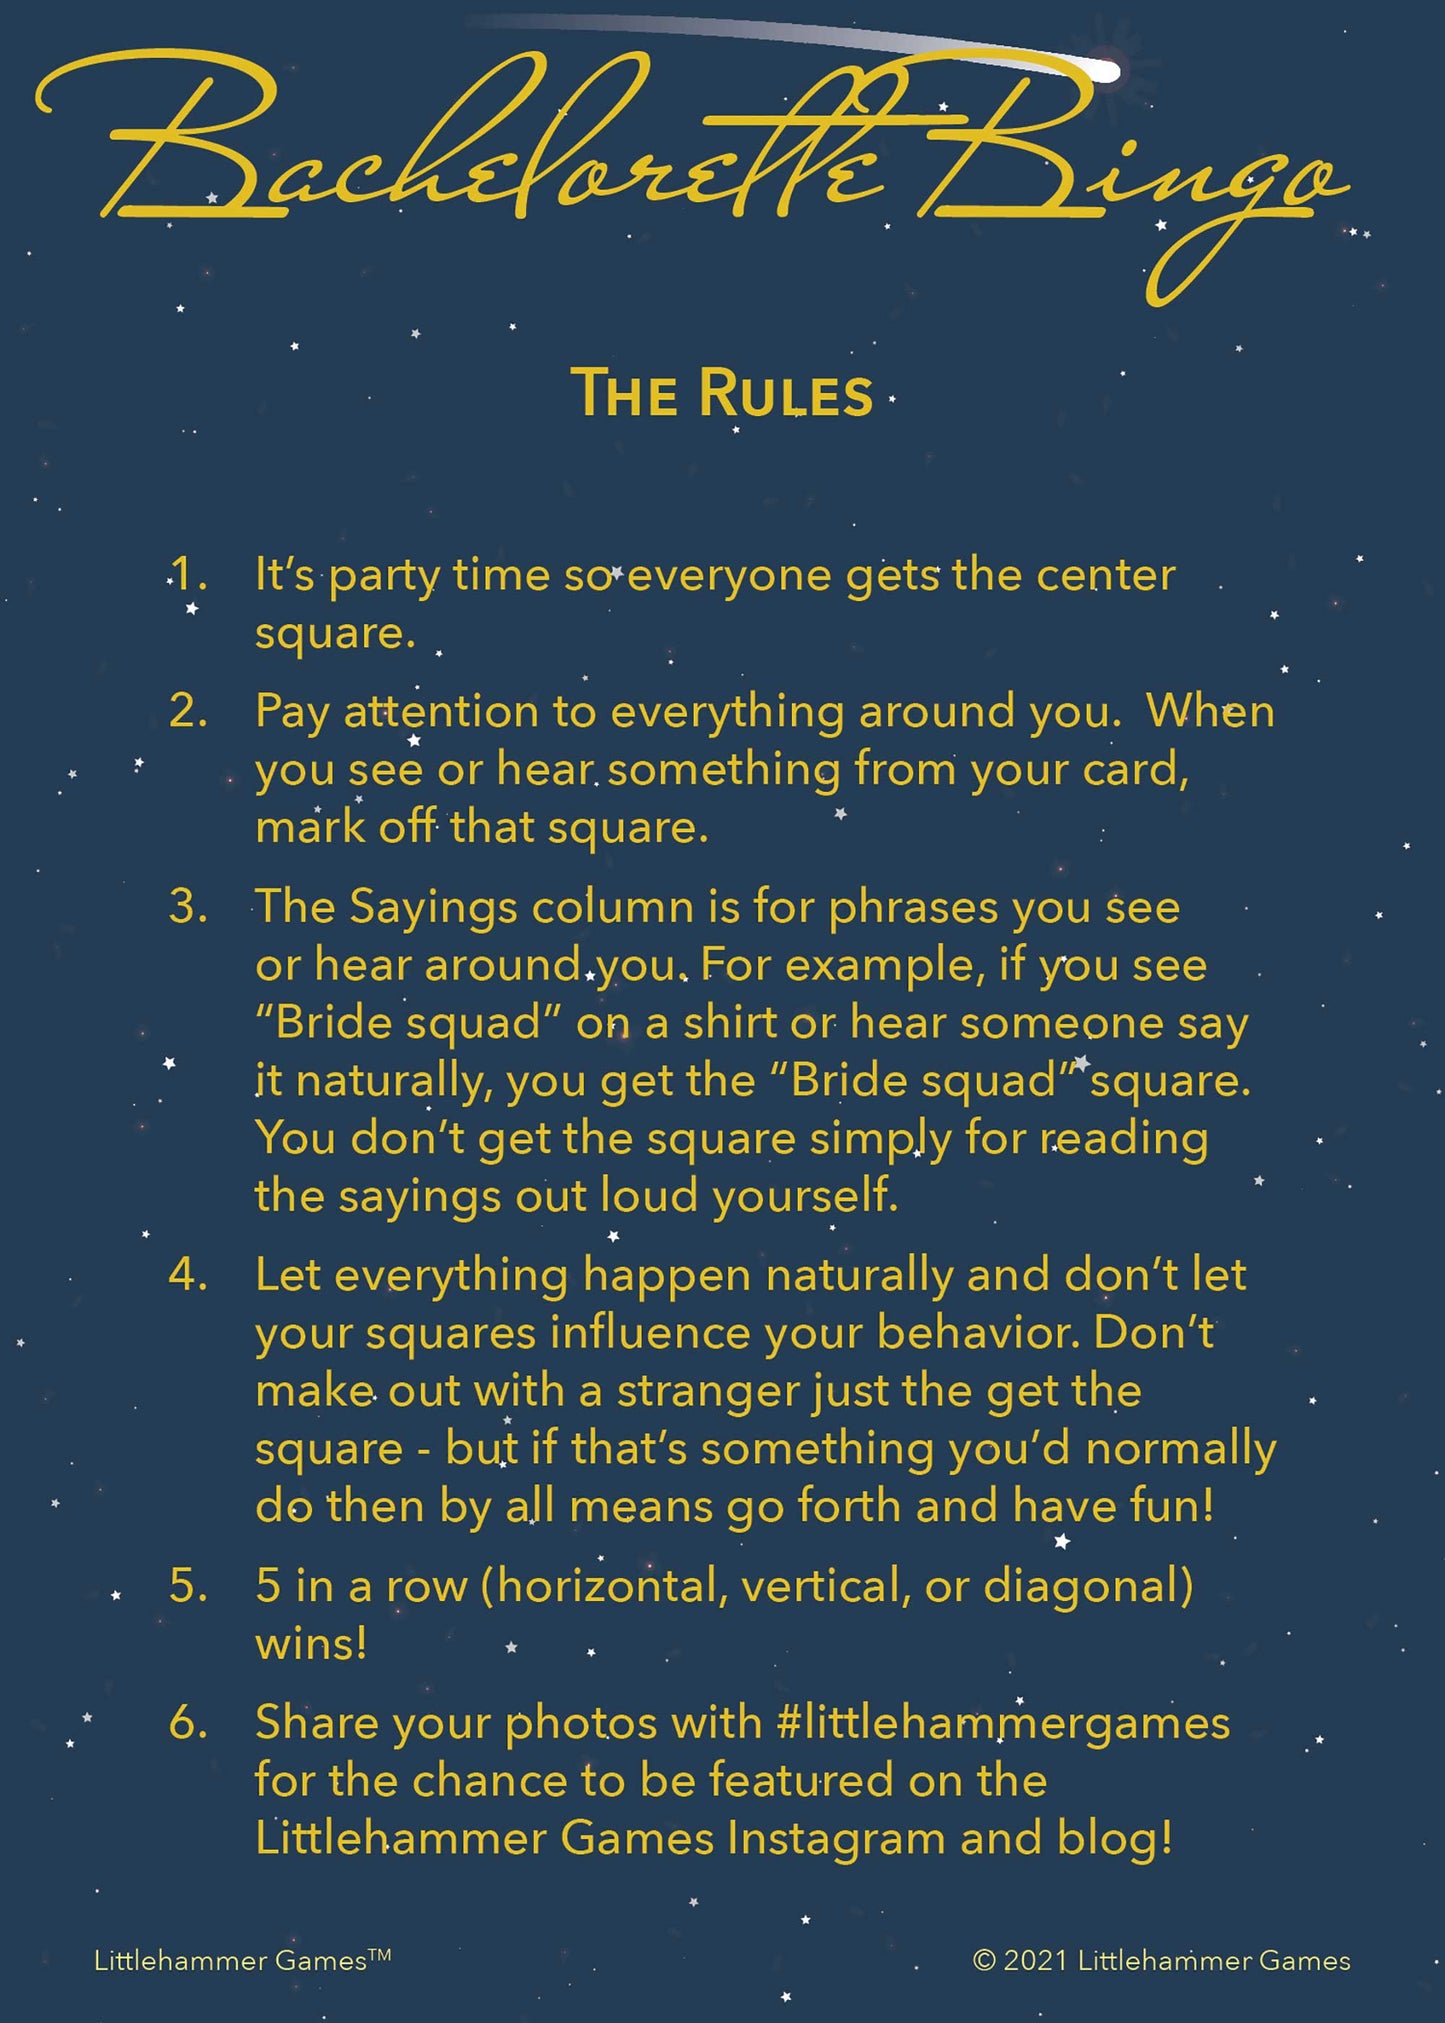 Bachelorette Bingo rules card with gold text on a celestial background